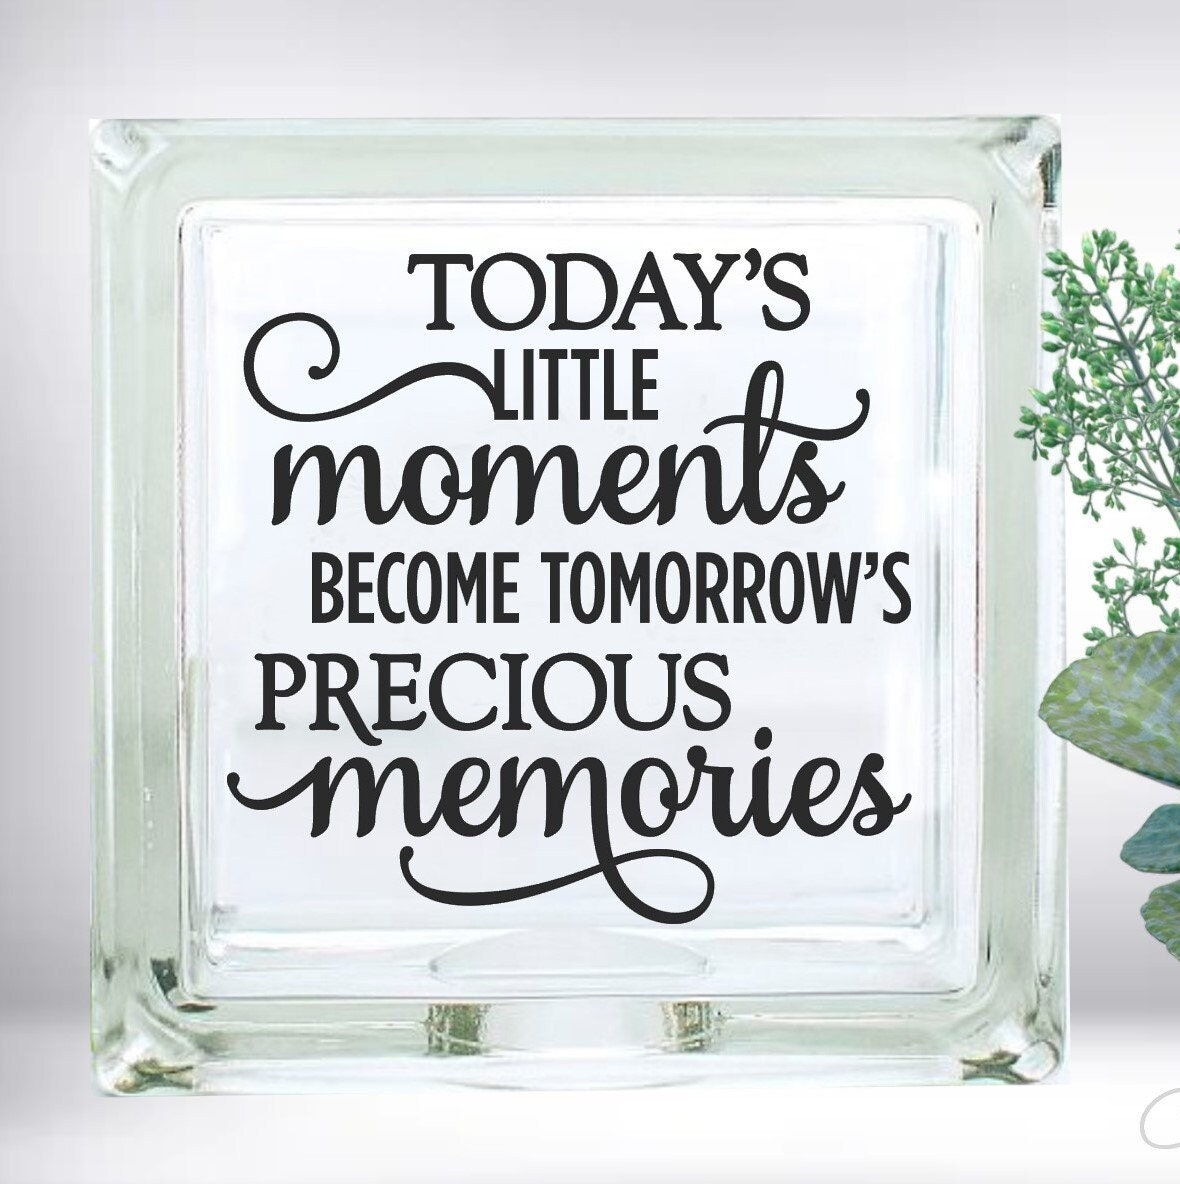 The little moments of today become the precious memories of